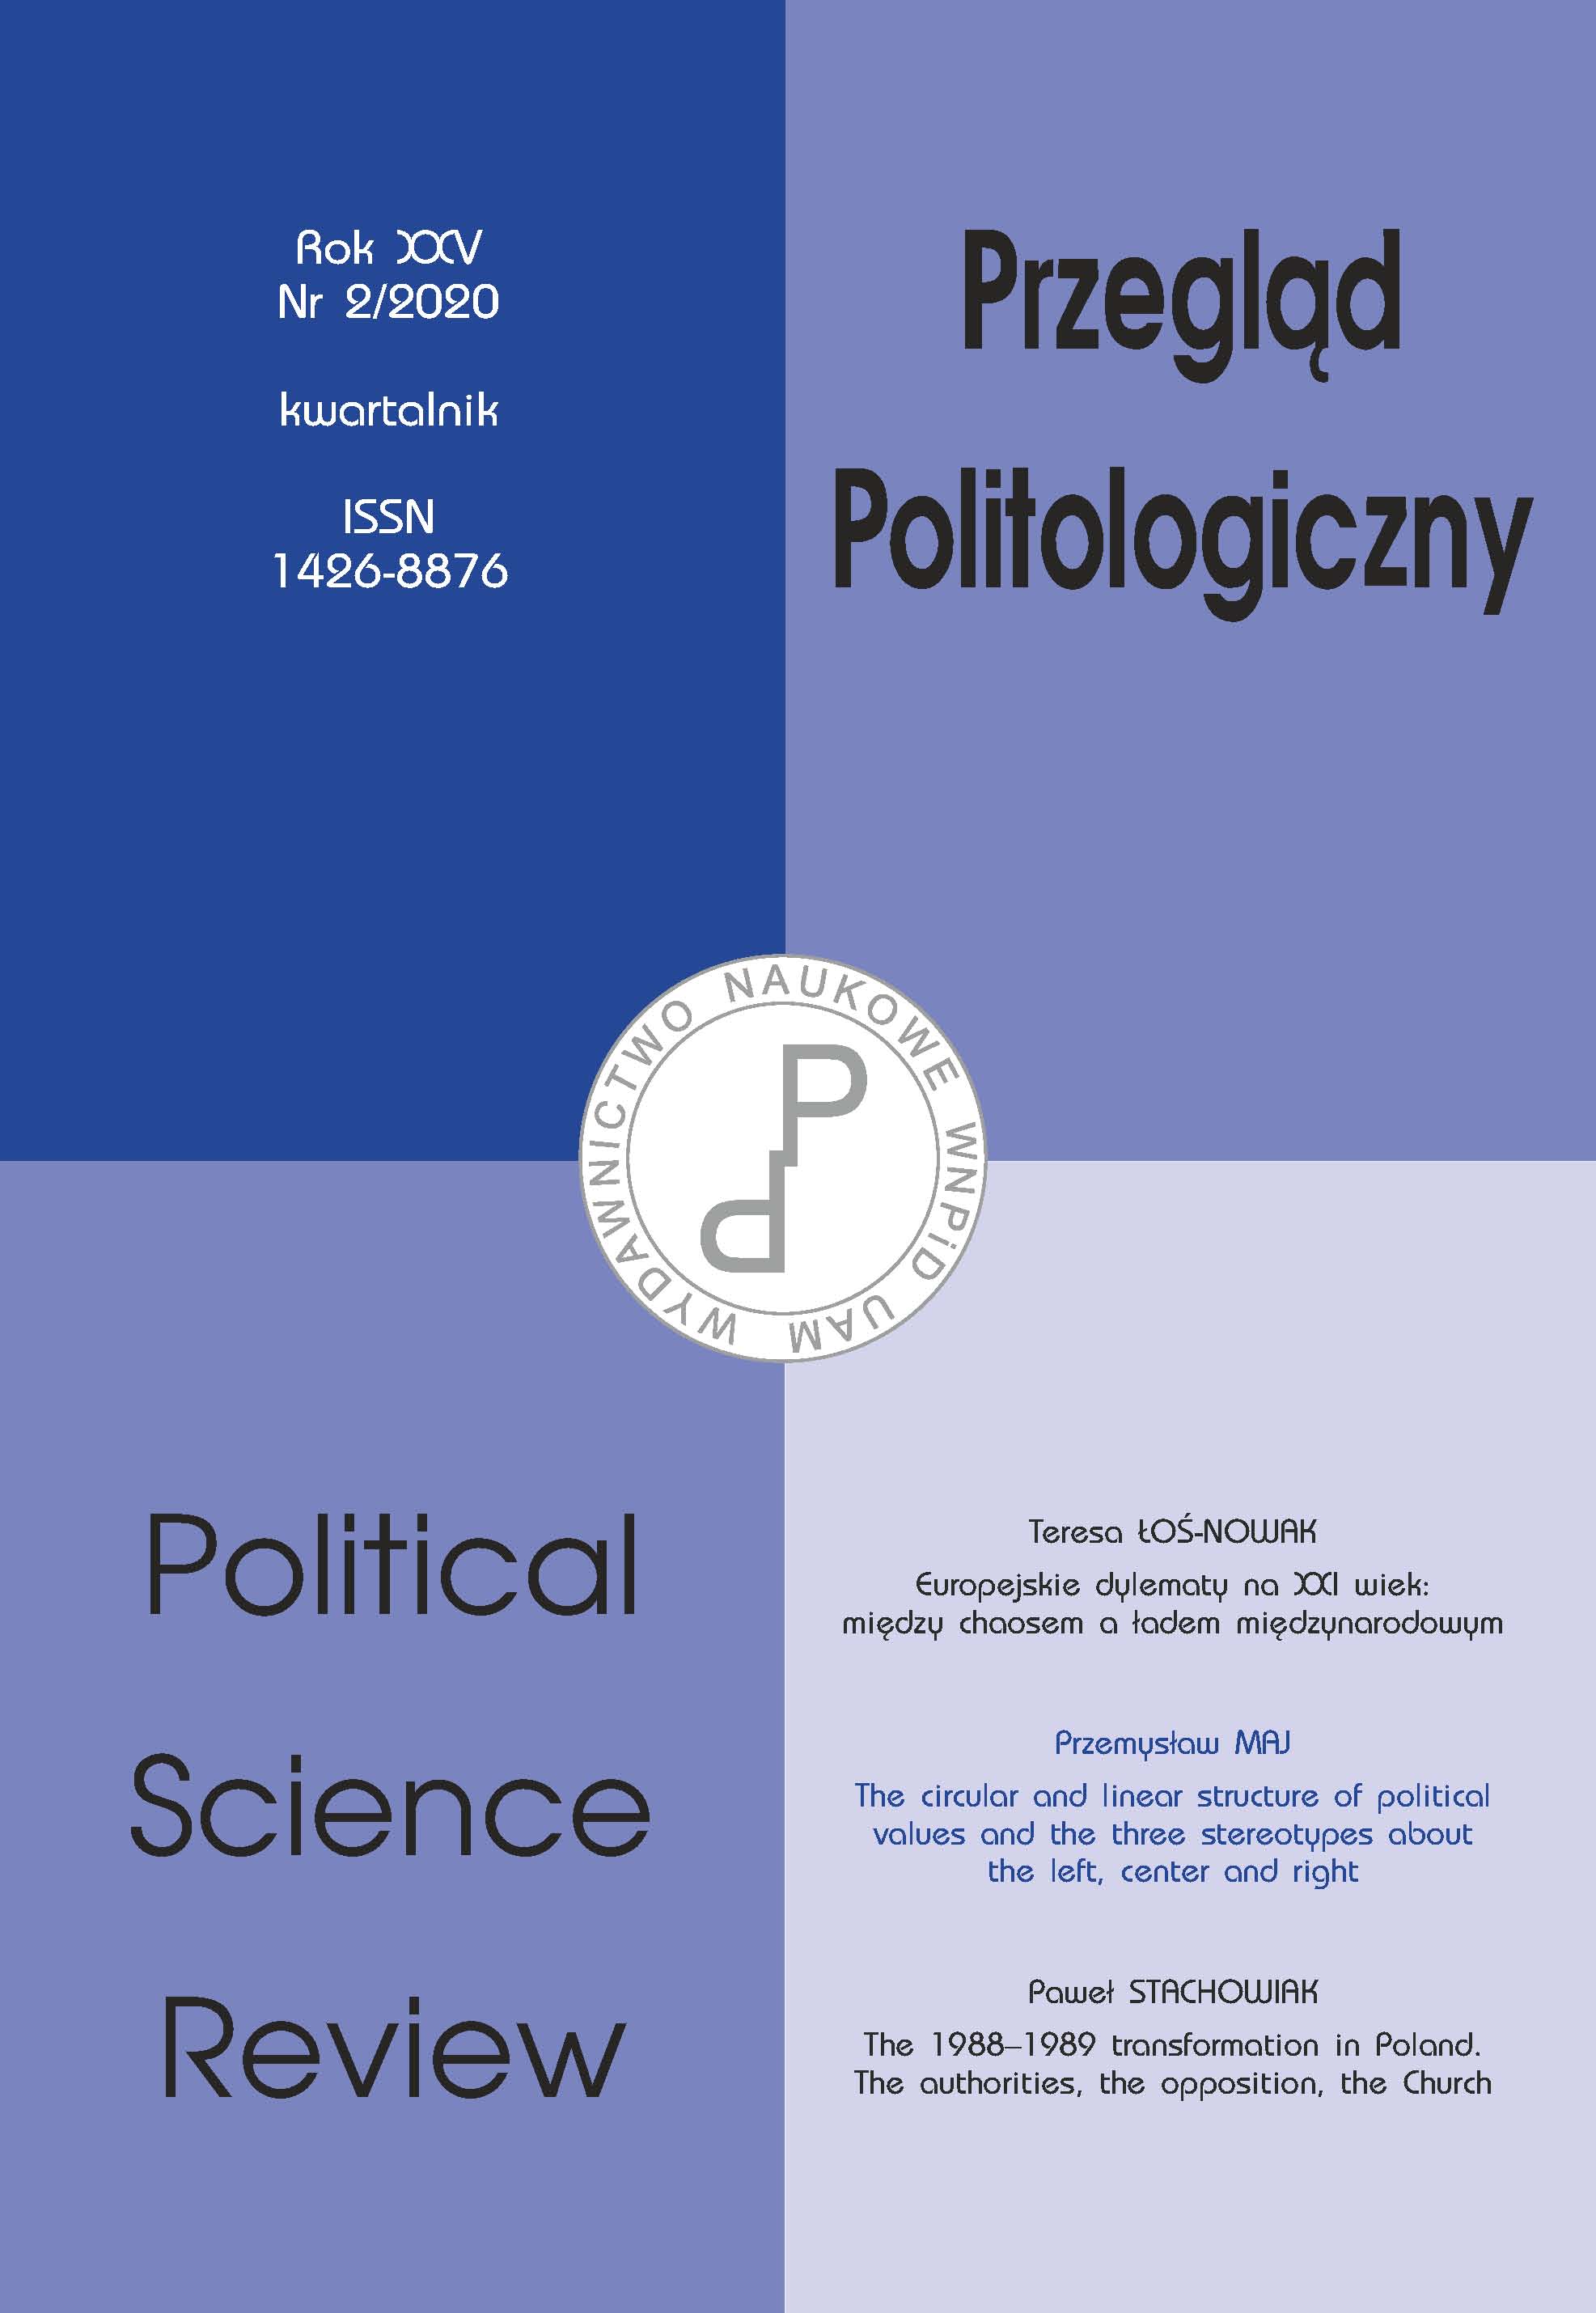 The circular and linear structure of political values and the three stereotypes about the left, center and right